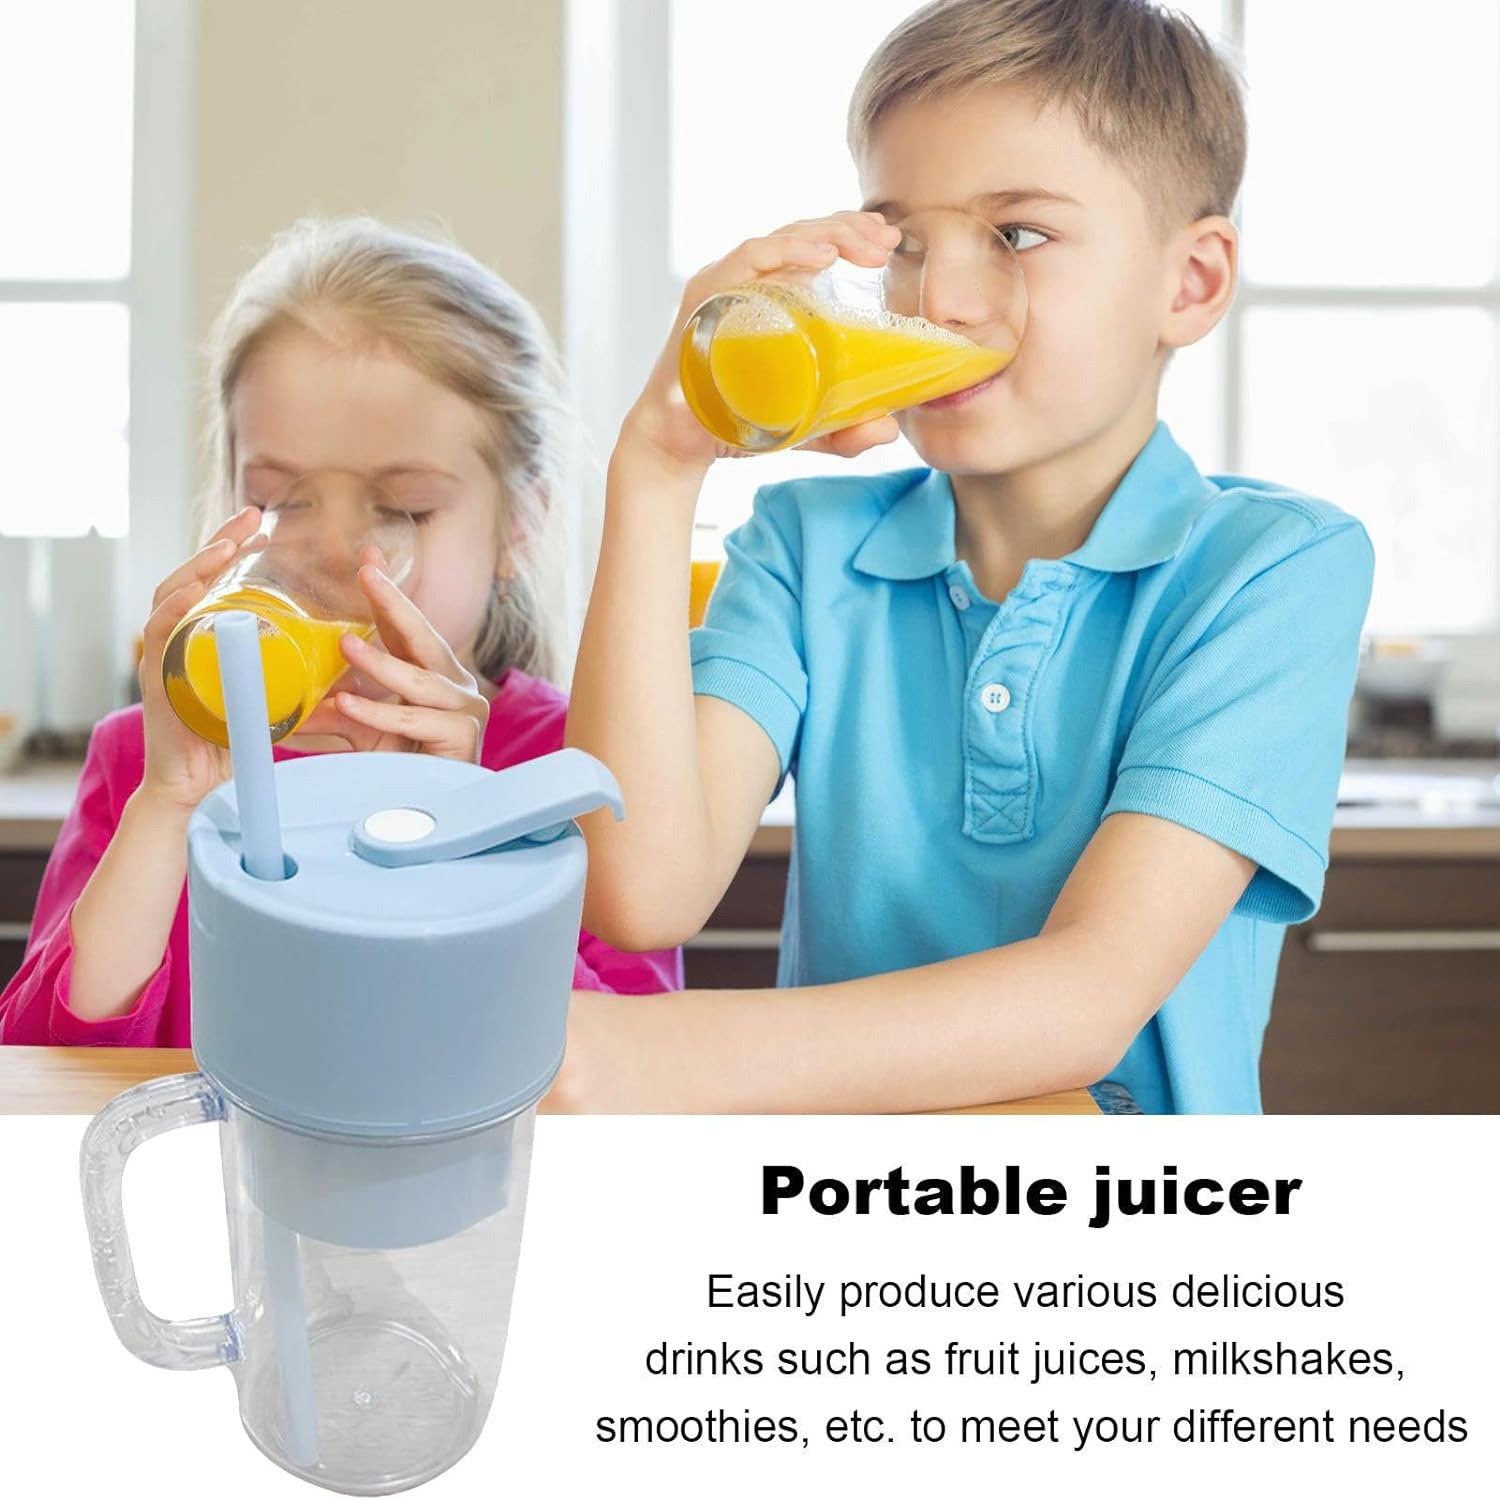 5841 2 In1 Portable Crusher Juicer With Handle & Straw for Smoothie Sipper USB Rechargeable (340 ml) 6 Stainless Steel Blades Compact Juicer Mixer, Juicer Portable Fresh Juice Blender Portable Electric Juicer ( 340 ML )